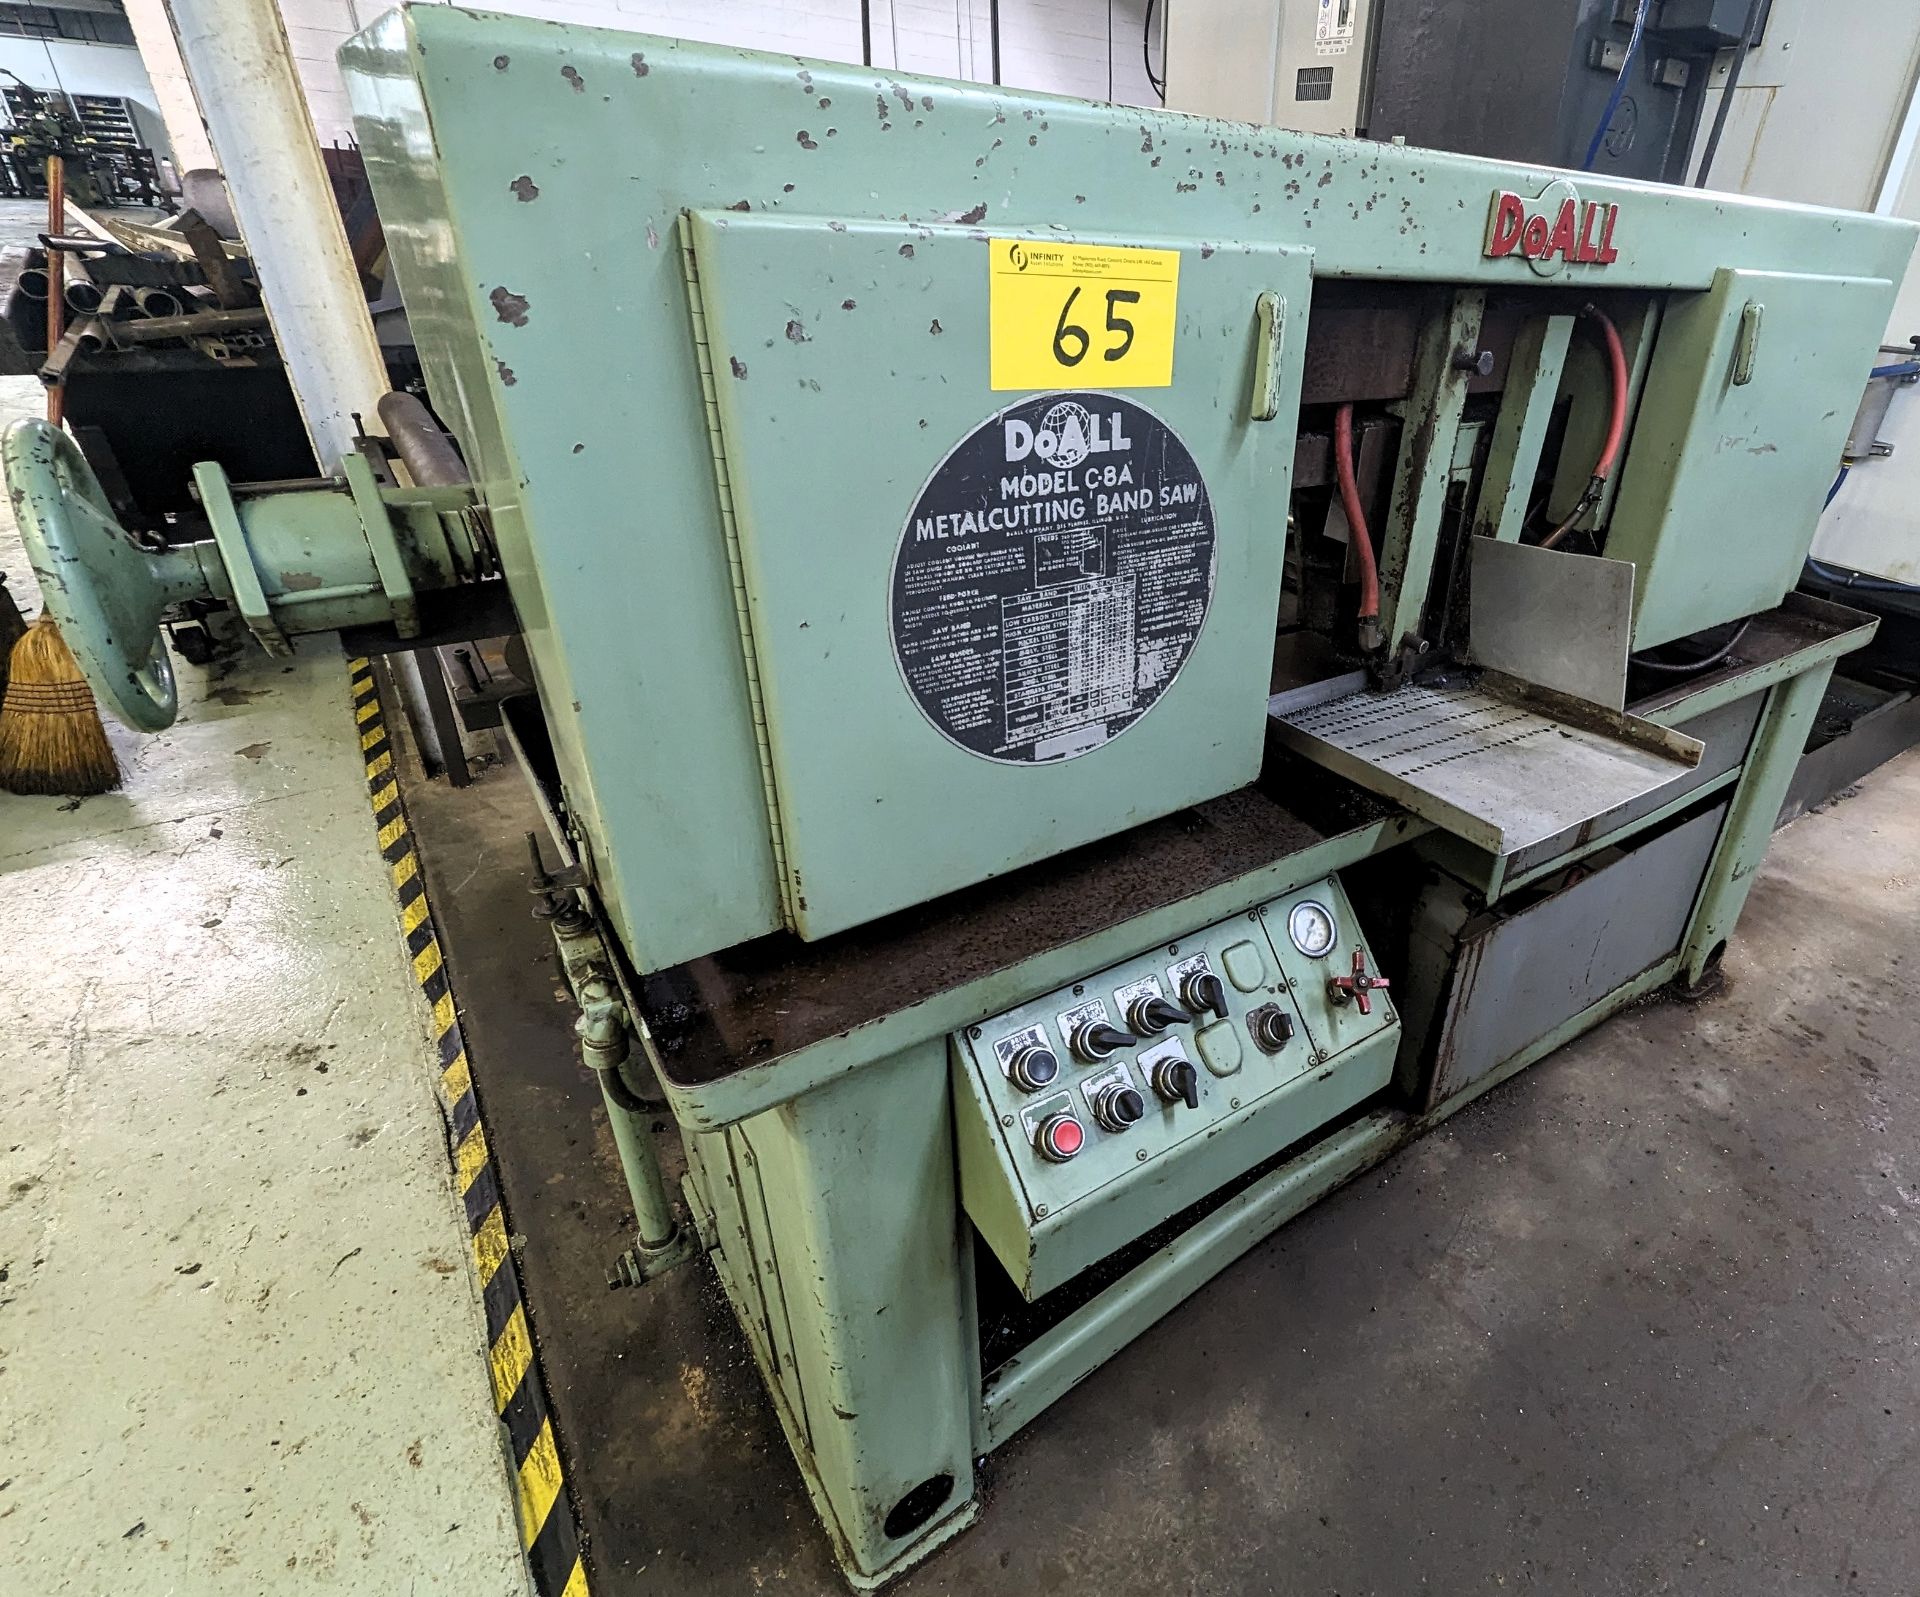 DOALL C-8A HORIZONTAL BANDSAW, APPROX. 8” X 12” CAP., CLAMPING, OUTFEED ROLLER CONVEYOR, S/N 224-